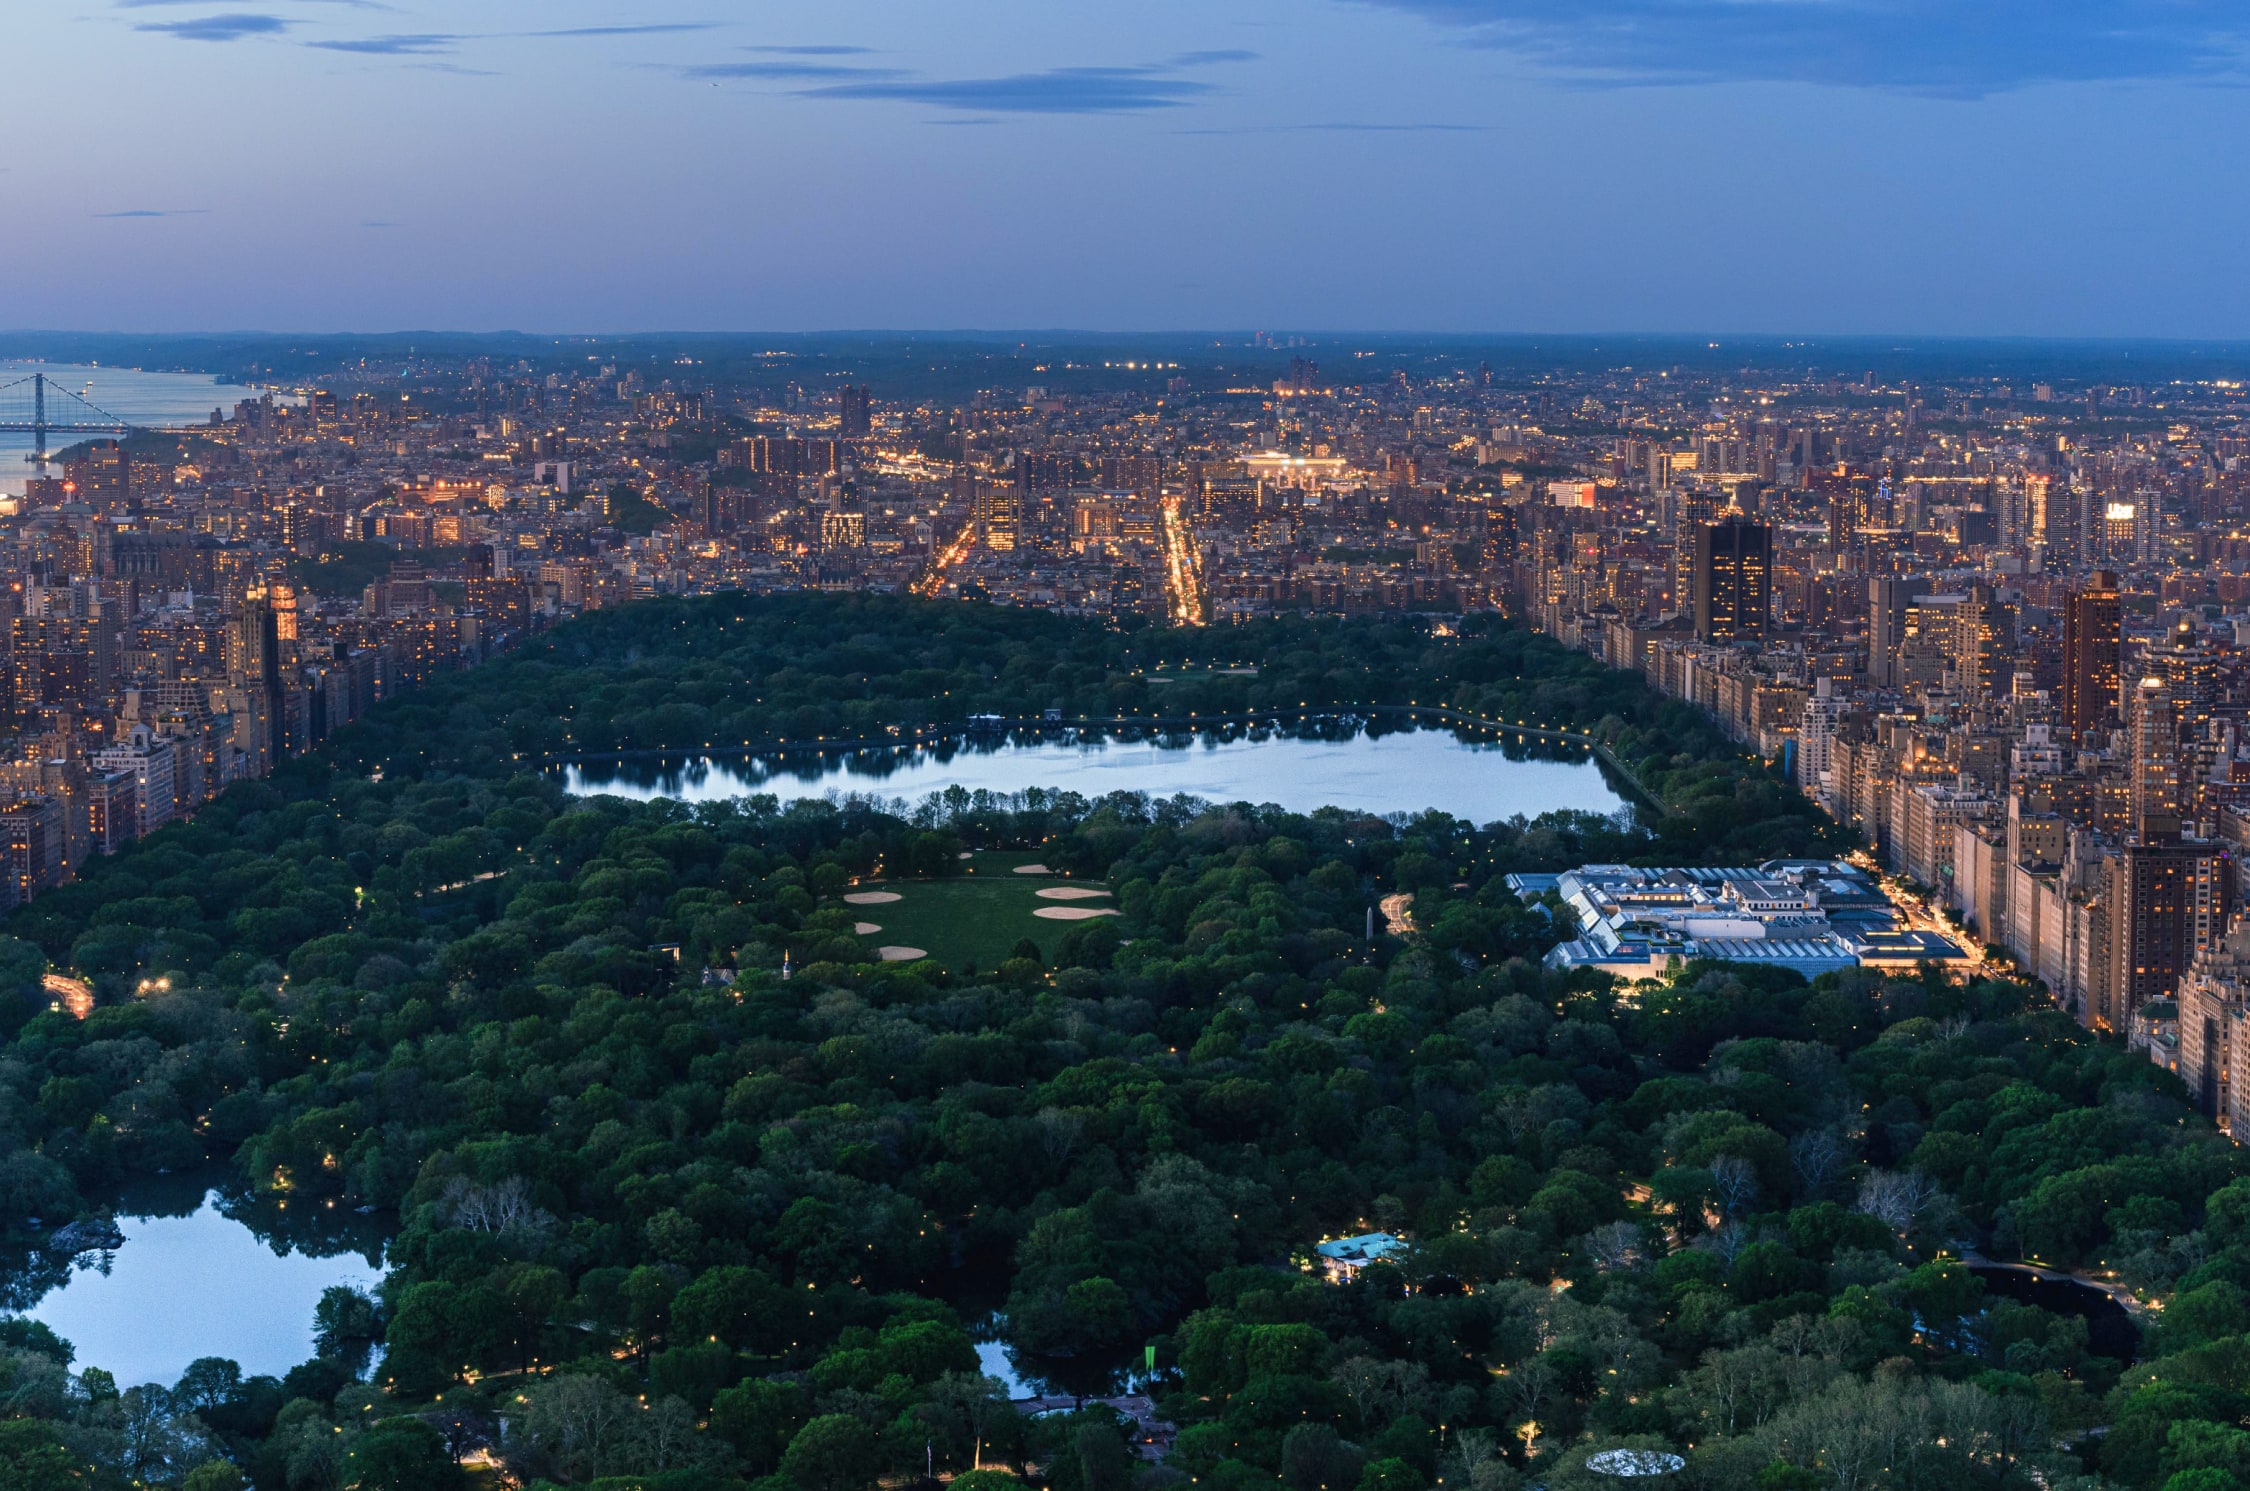 View of Central Park from 53W53 condominium tower